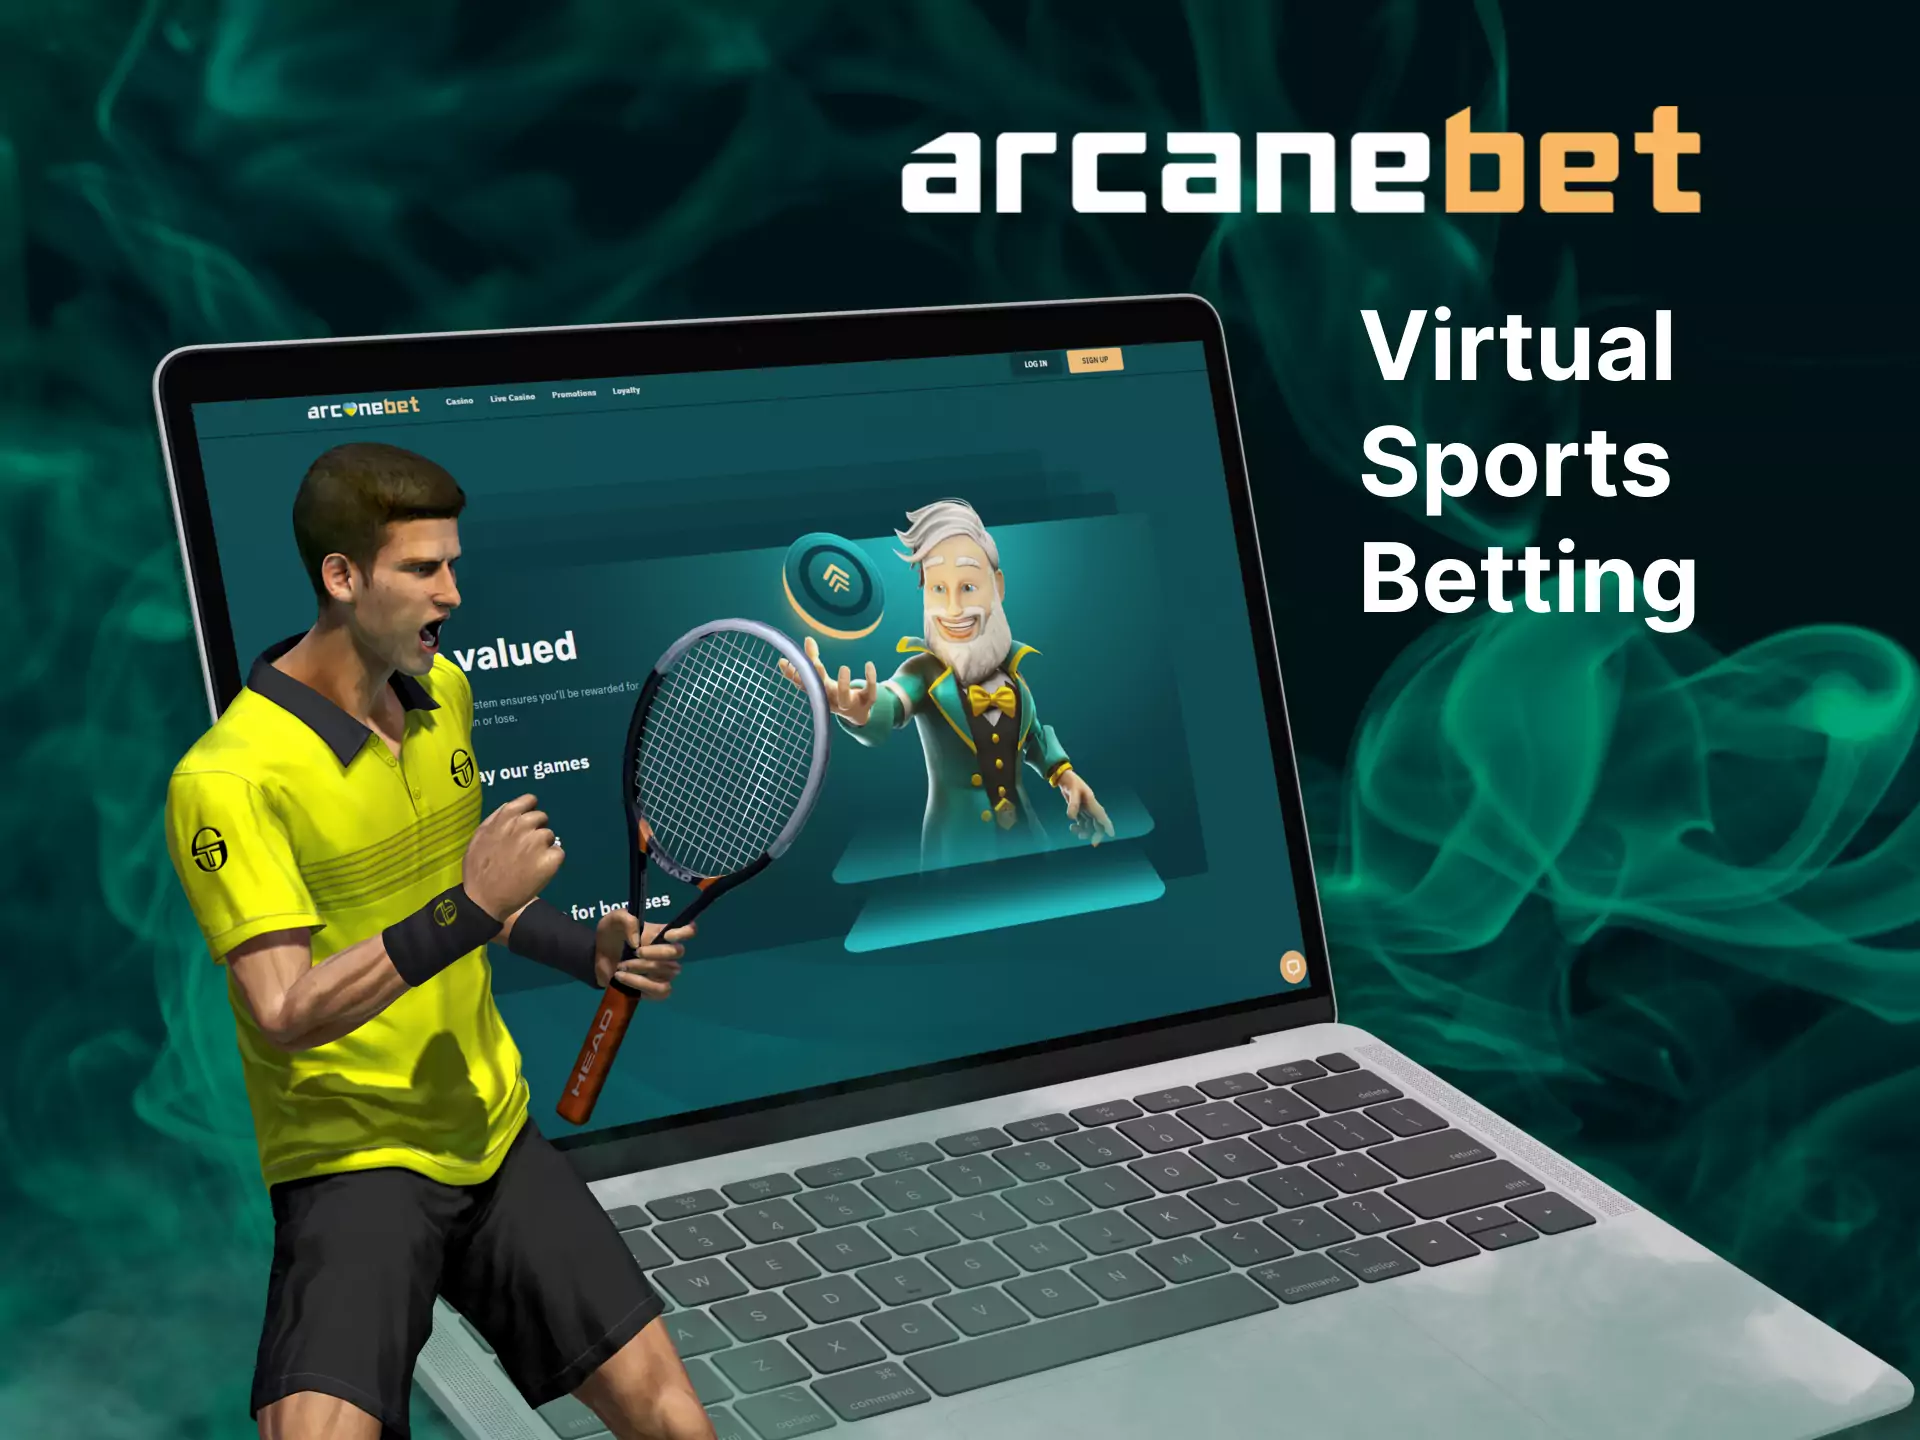 Place bets on virtual sports on Arcanebet.